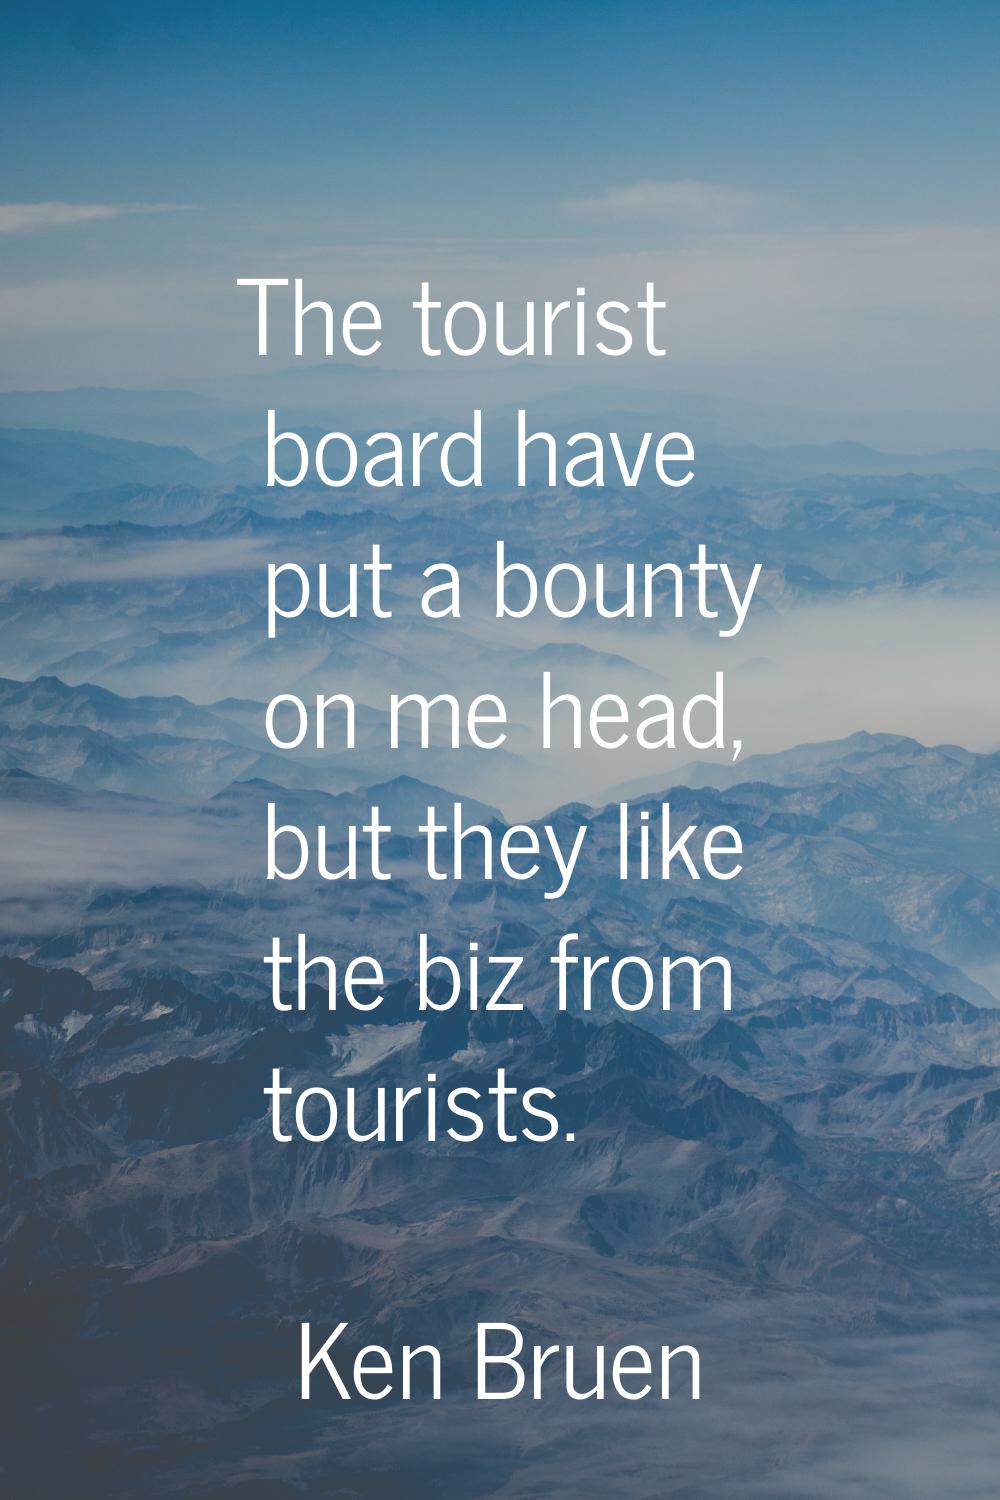 The tourist board have put a bounty on me head, but they like the biz from tourists.